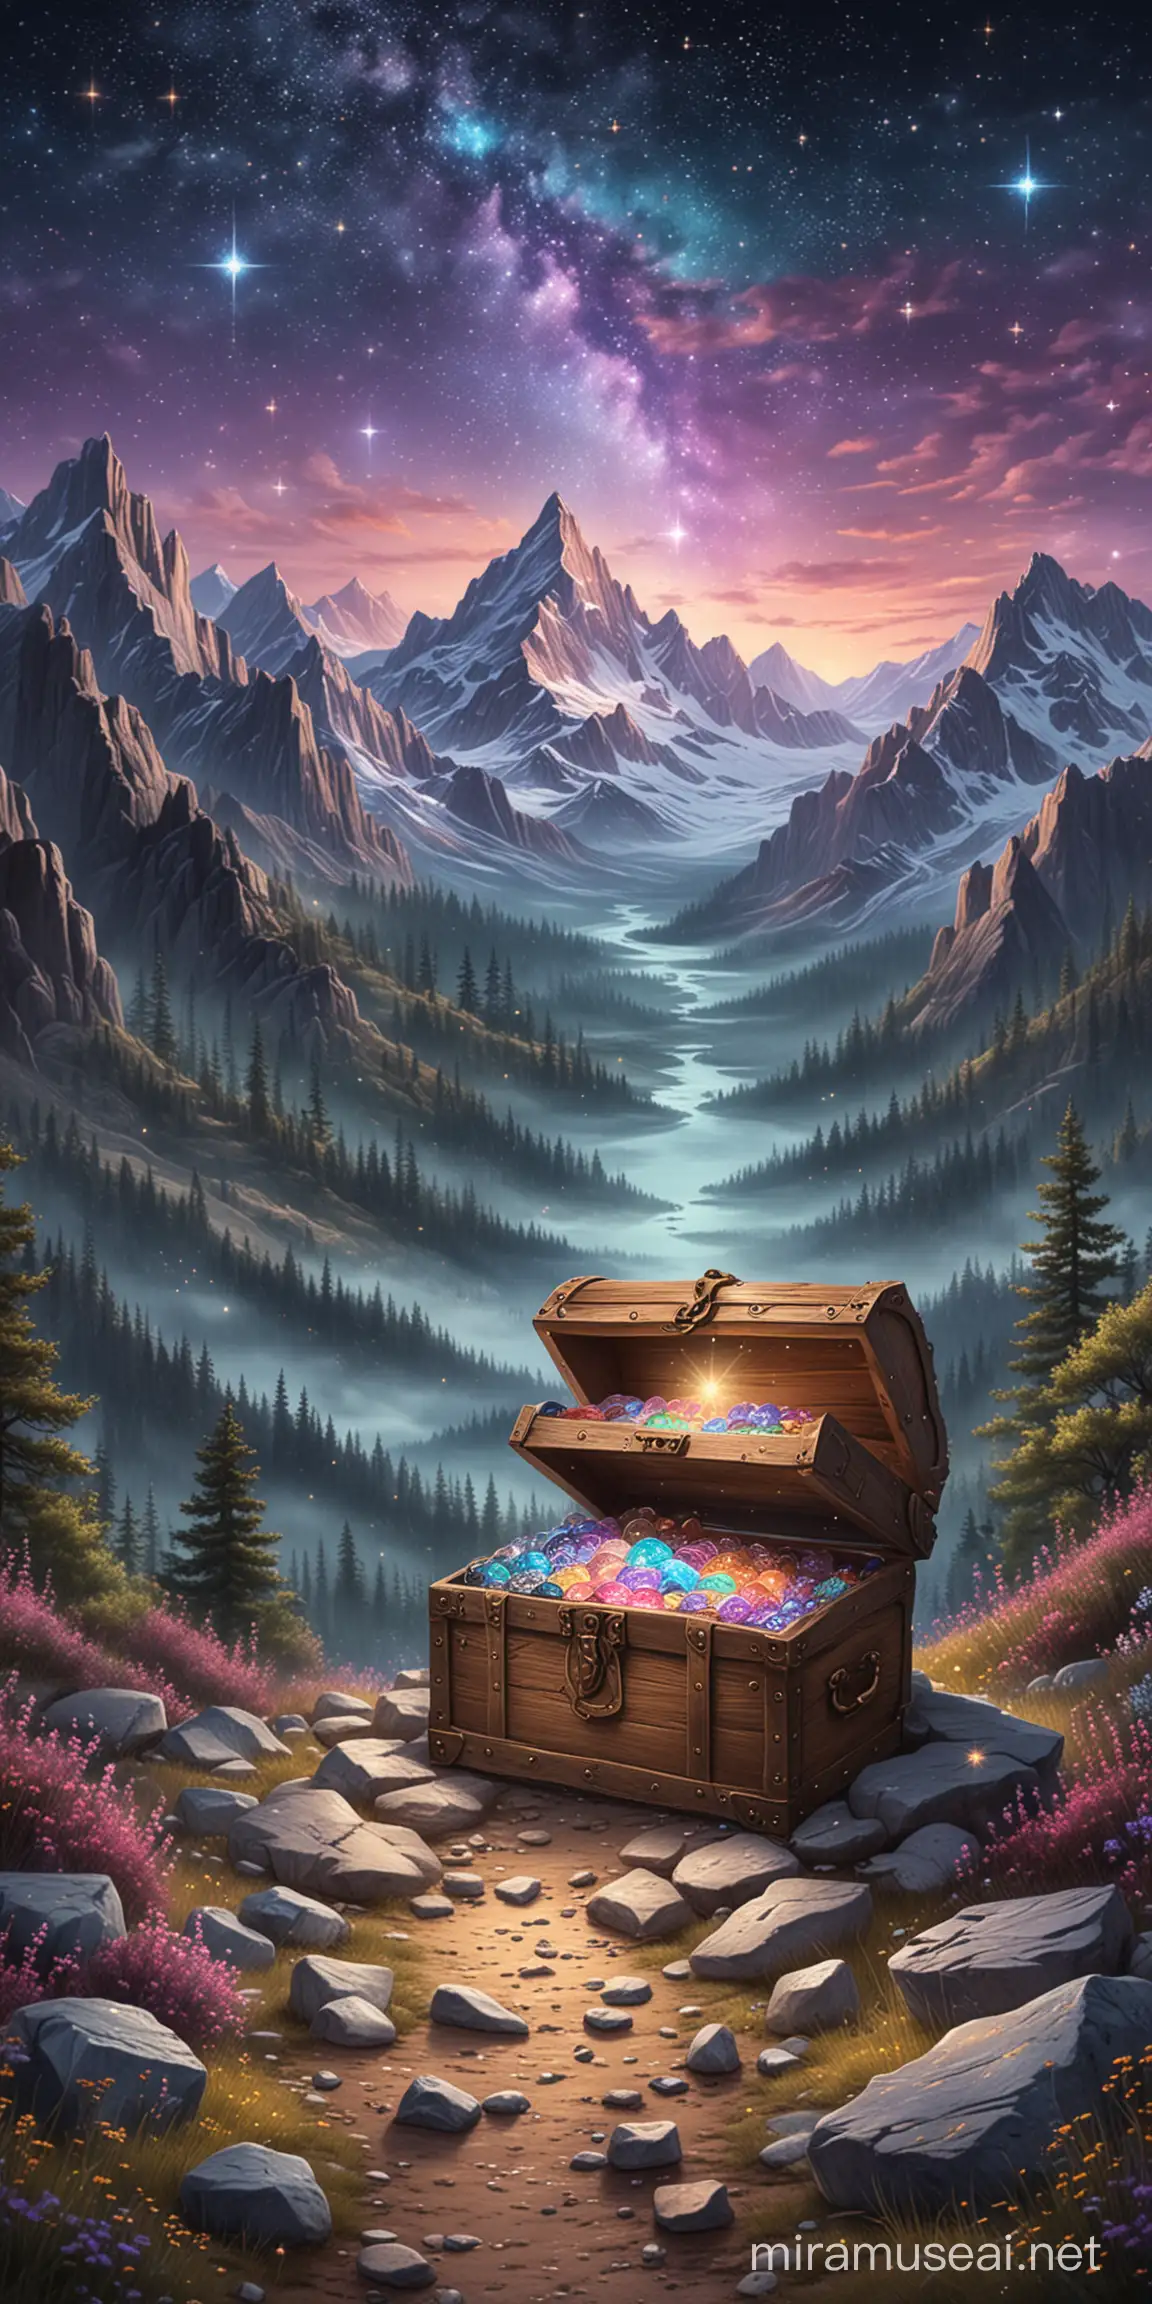 Overflowing Treasure Chest Pastel Drawing Enchanting Mountain Scenery with Starry Night Sky